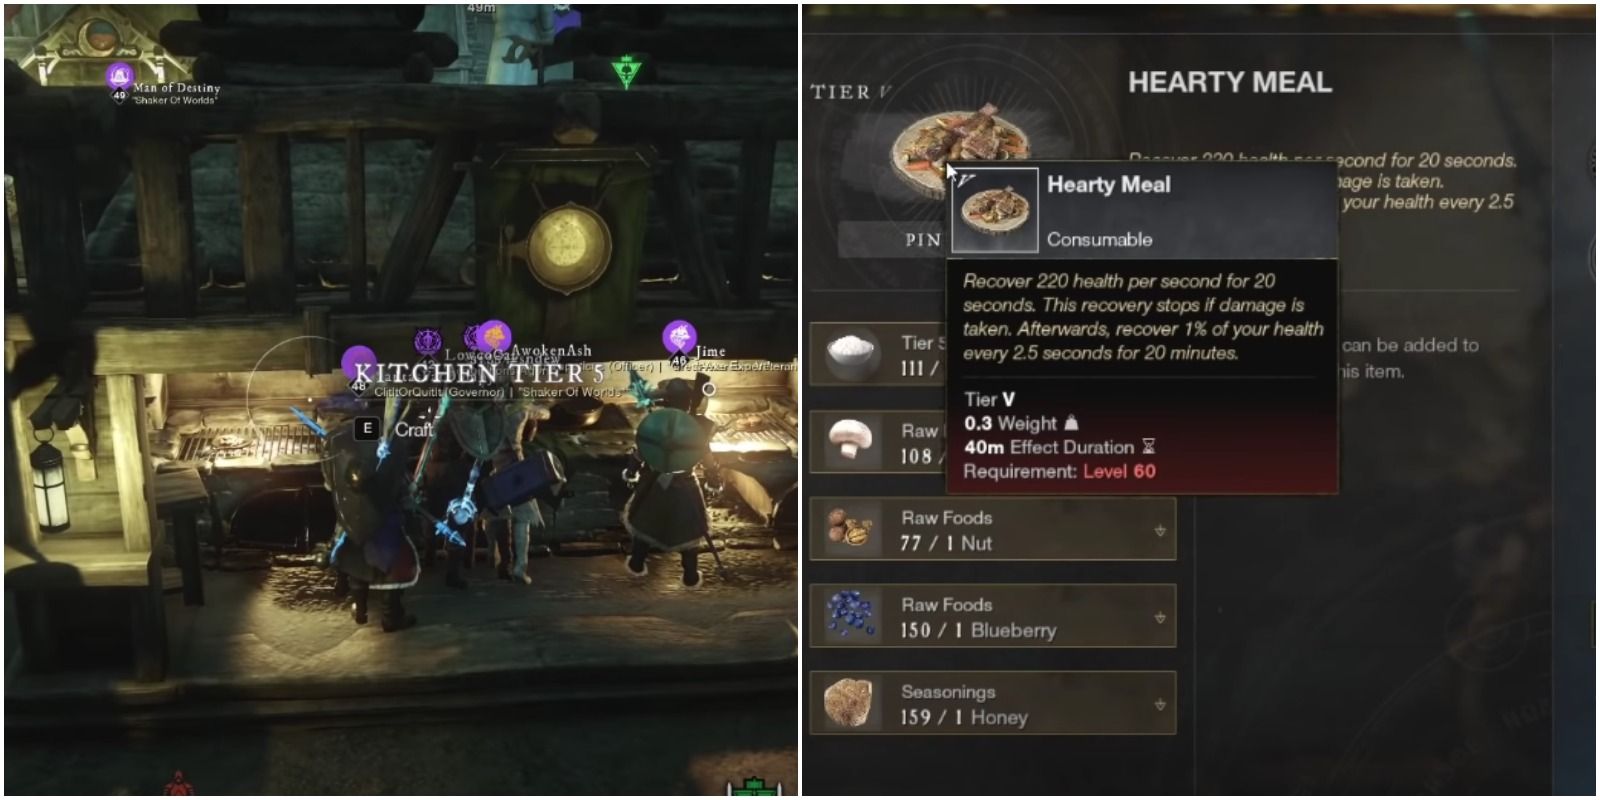 feature image new world cooking guide kitchen tier 5 and hearty meal food item